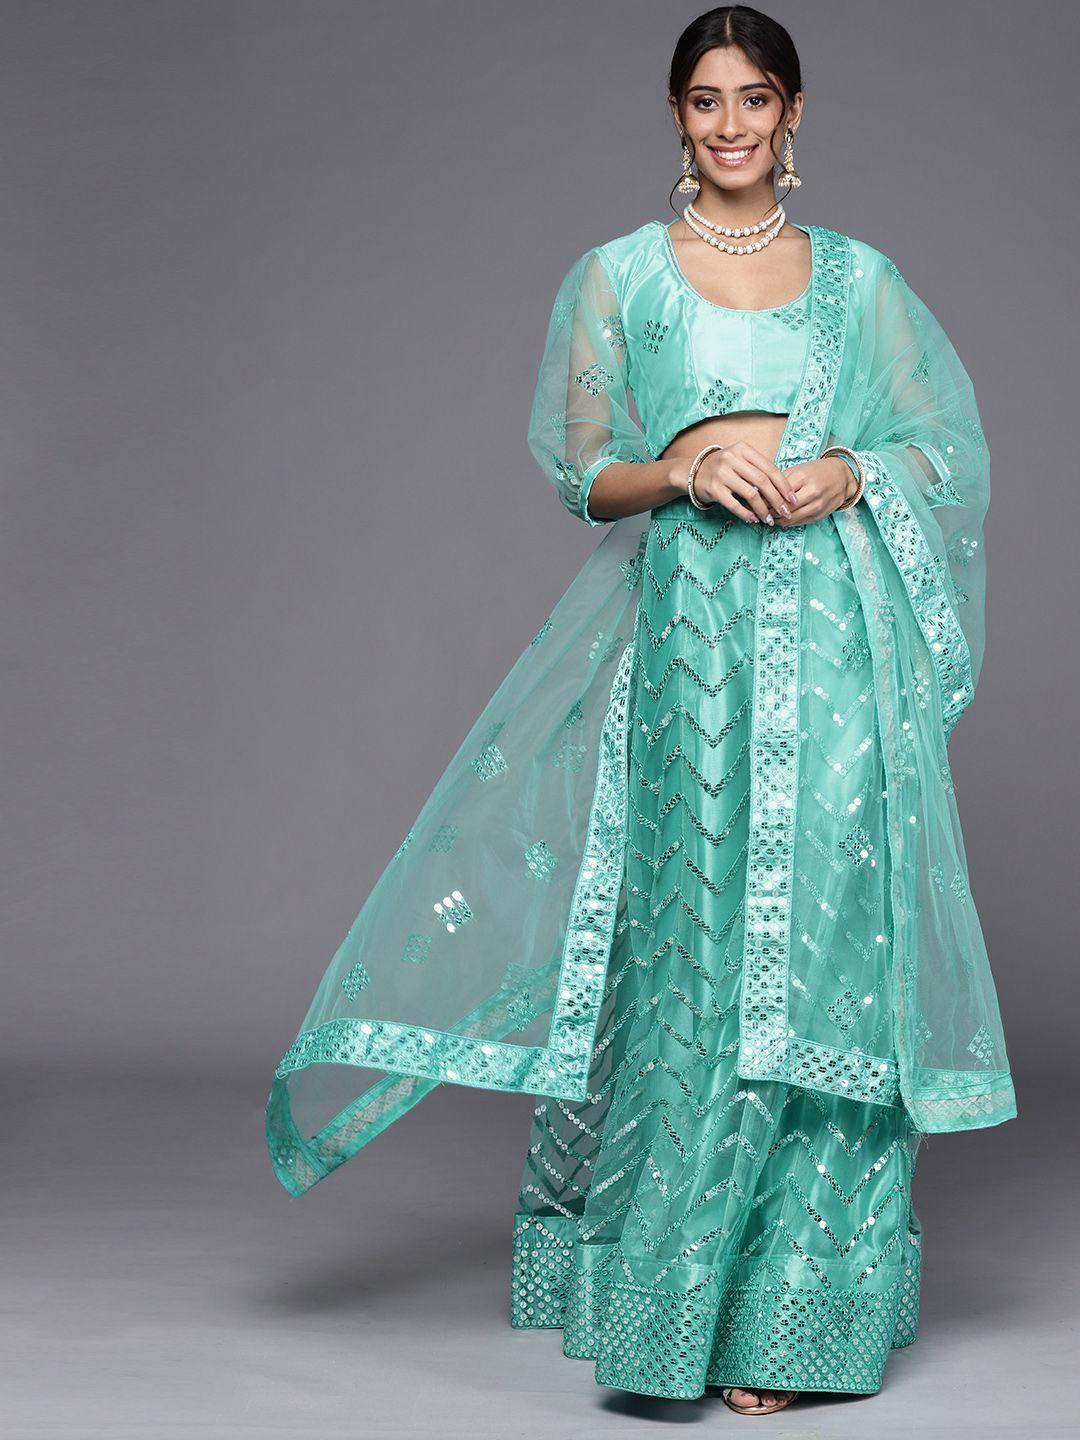 chhabra 555 turquoise blue embroidered mirror work semi-stitched lehenga & unstitched blouse with dupatta